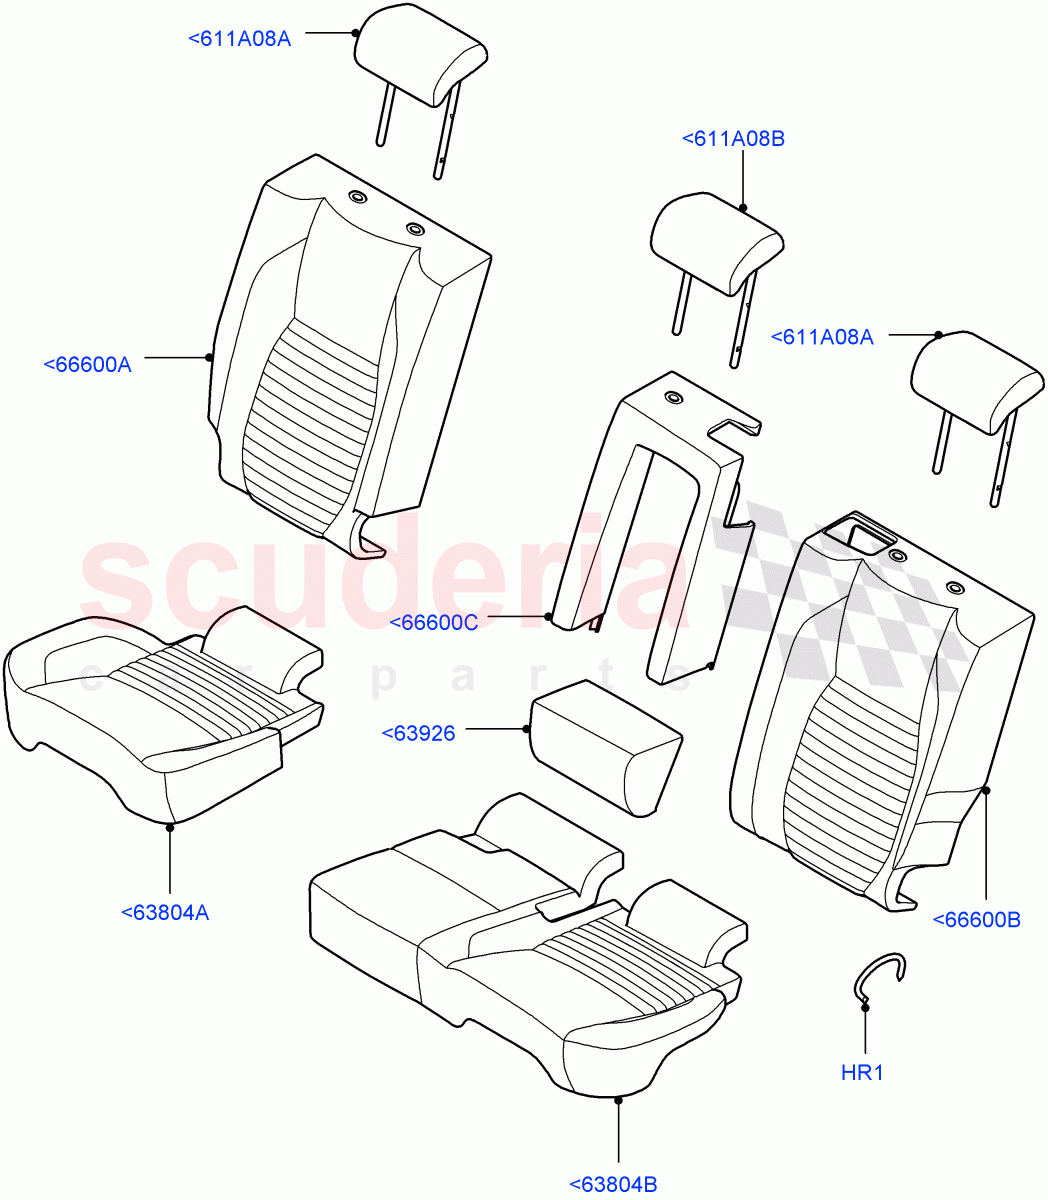 Rear Seat Covers(Taurus Leather Perforated,Itatiaia (Brazil),60/40 Load Through With Slide)((V)FROMLT000001) of Land Rover Land Rover Discovery Sport (2015+) [2.0 Turbo Petrol AJ200P]